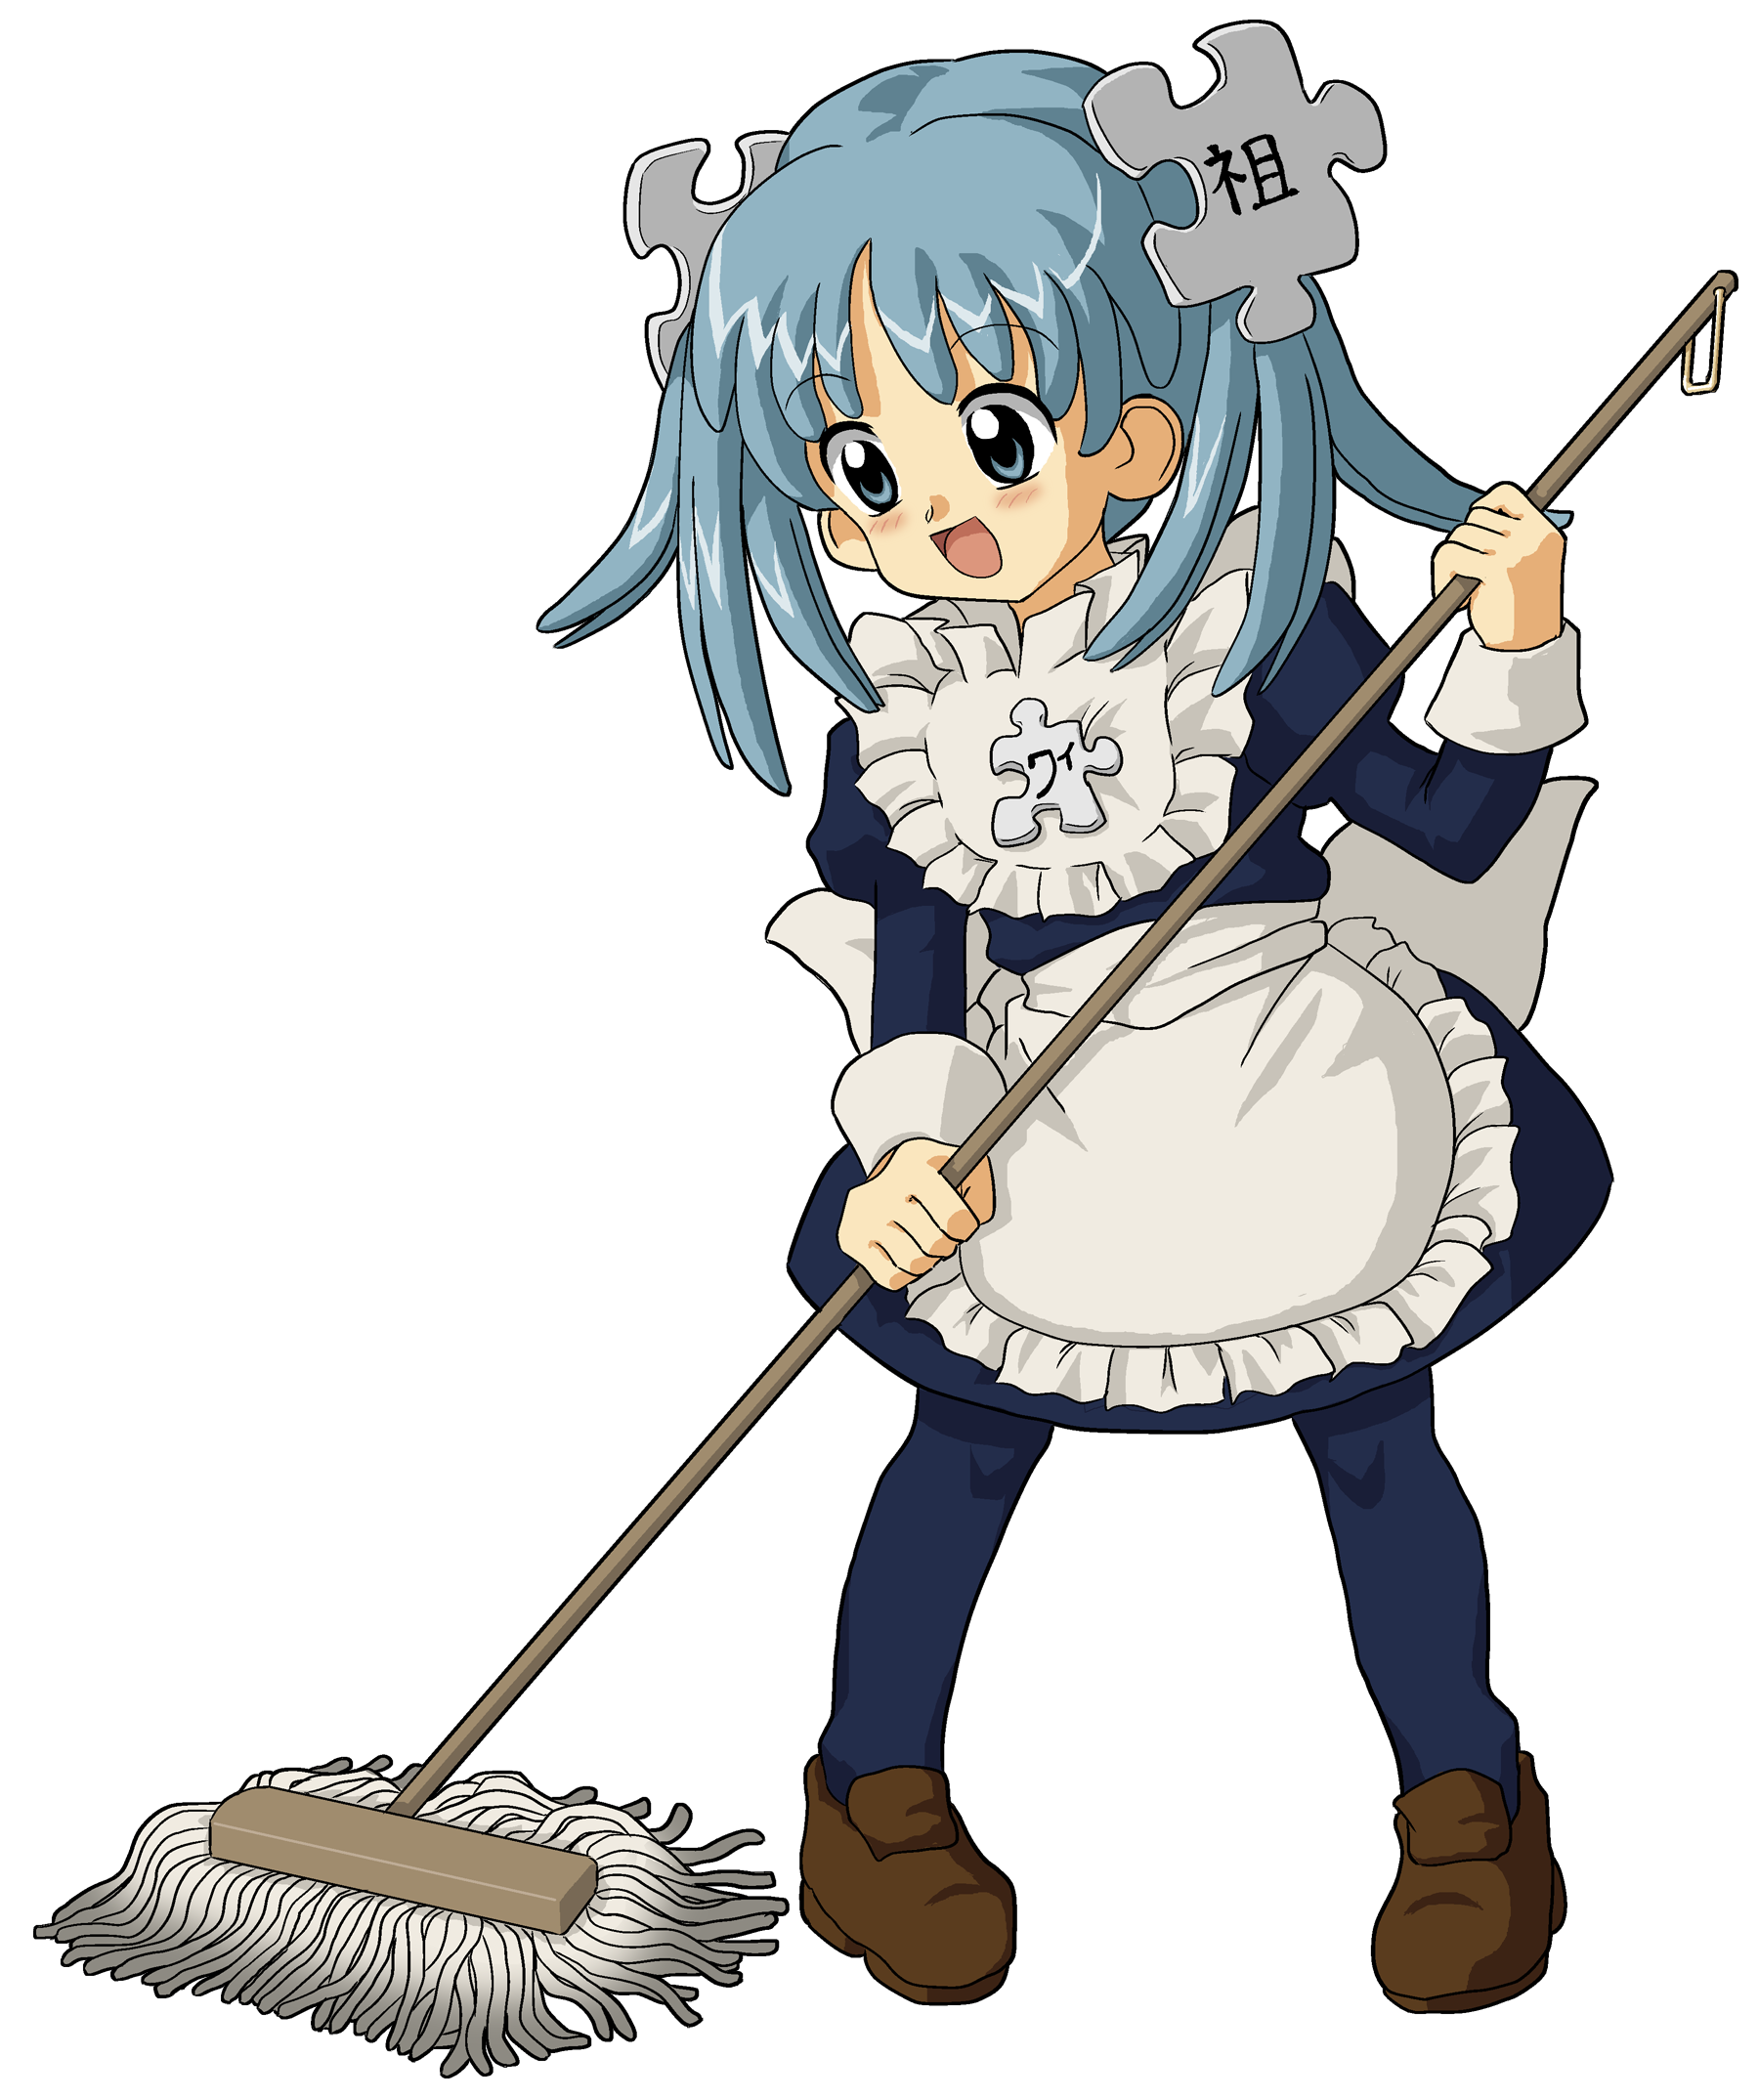 mop clipart mop cleaning